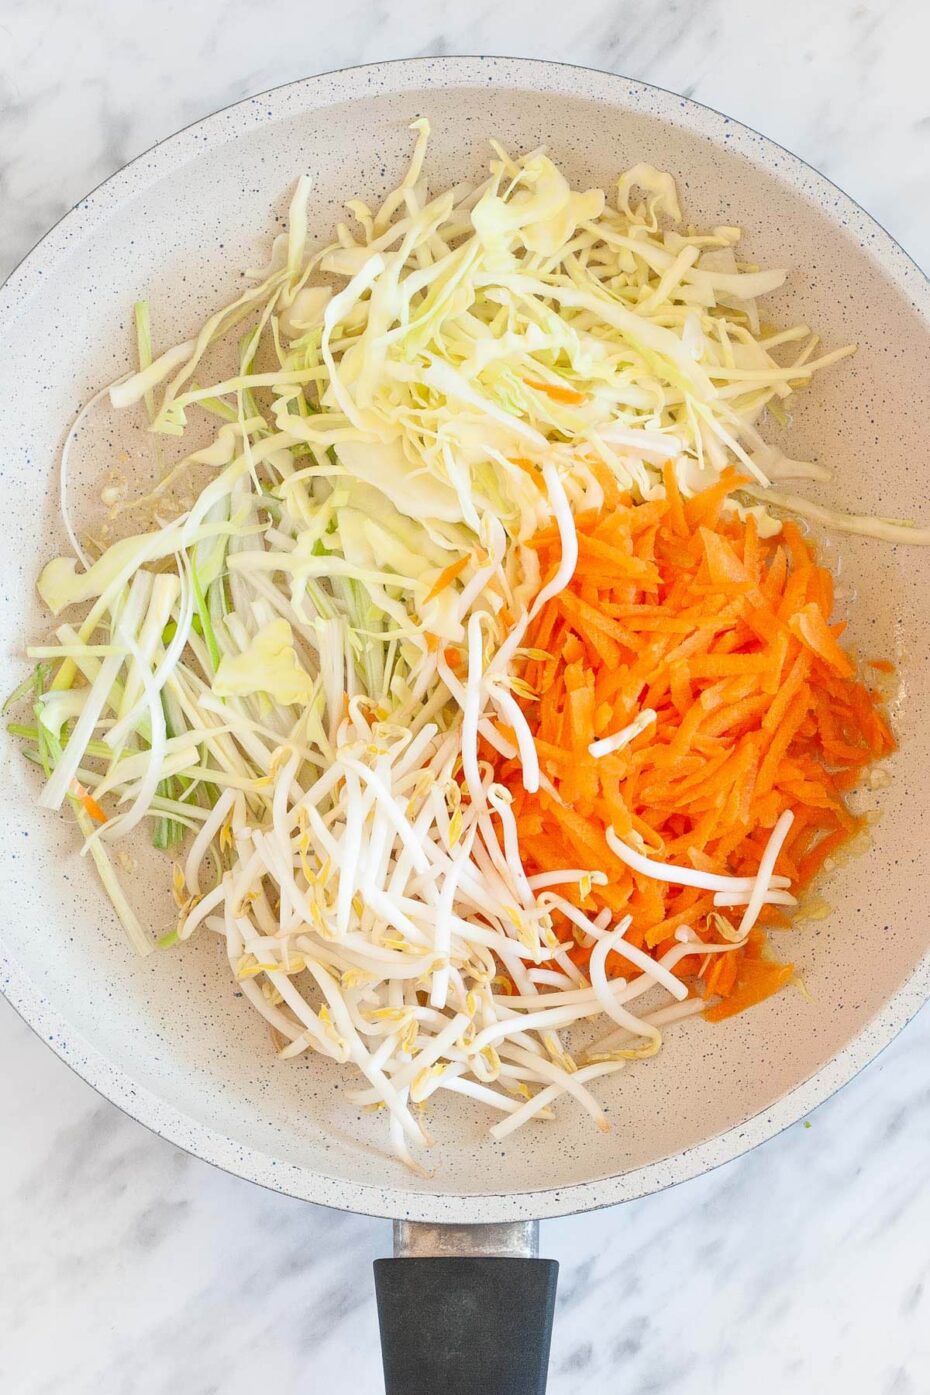 A white frying pan from above full of white and orange shredded veggies like carrots, cabbage, spring onion and sprouts raw before cooking